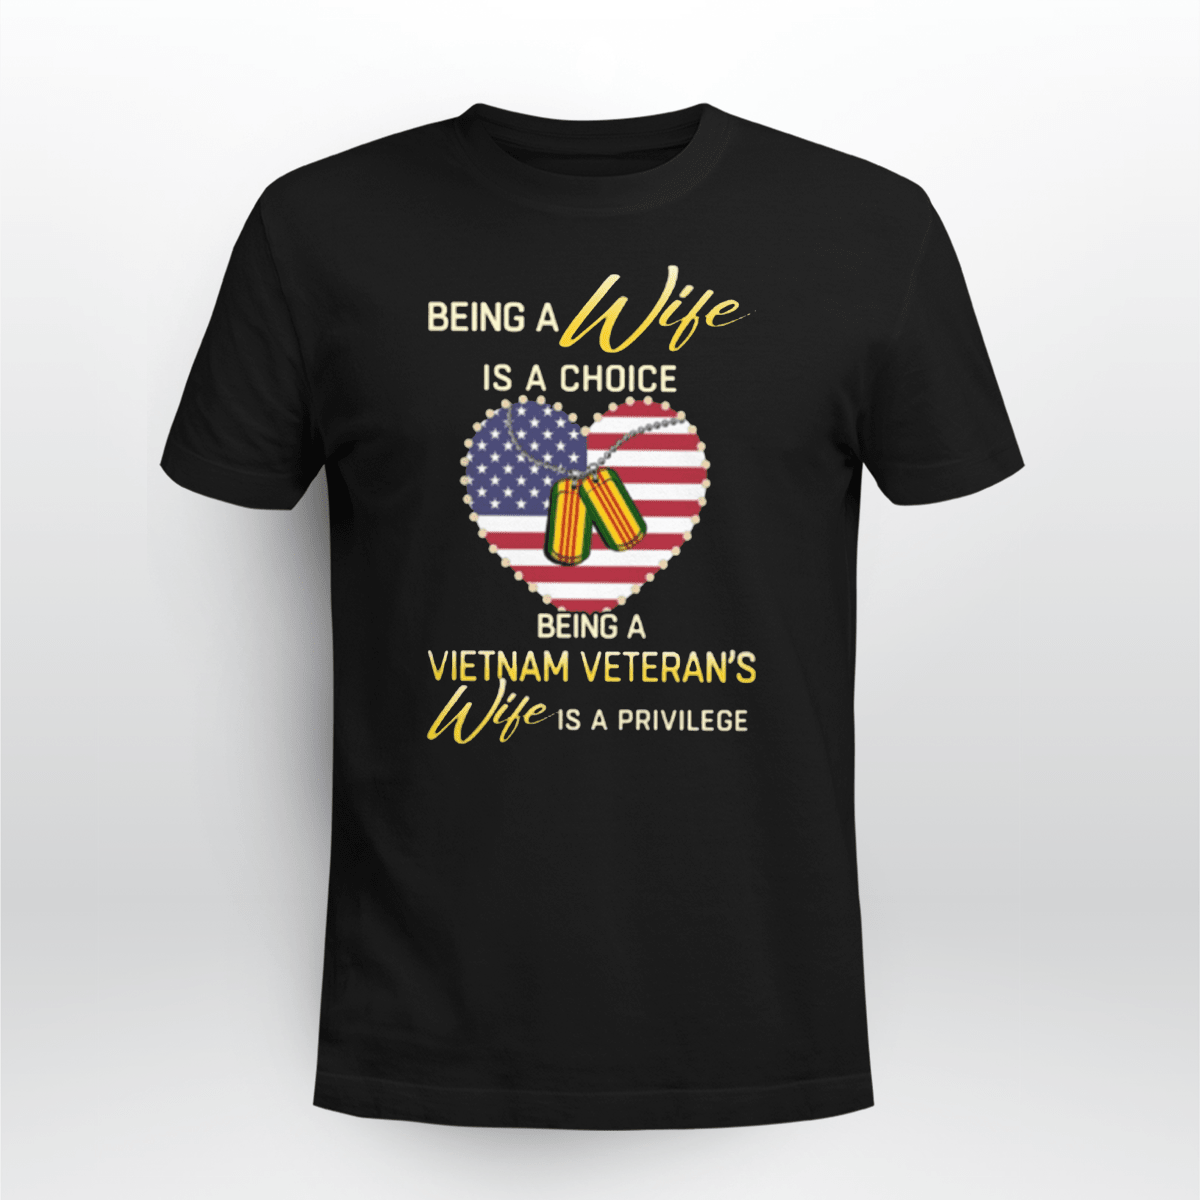 This discount is for you : being a wife is a choice being a vietnam veteran's wife is a privlege